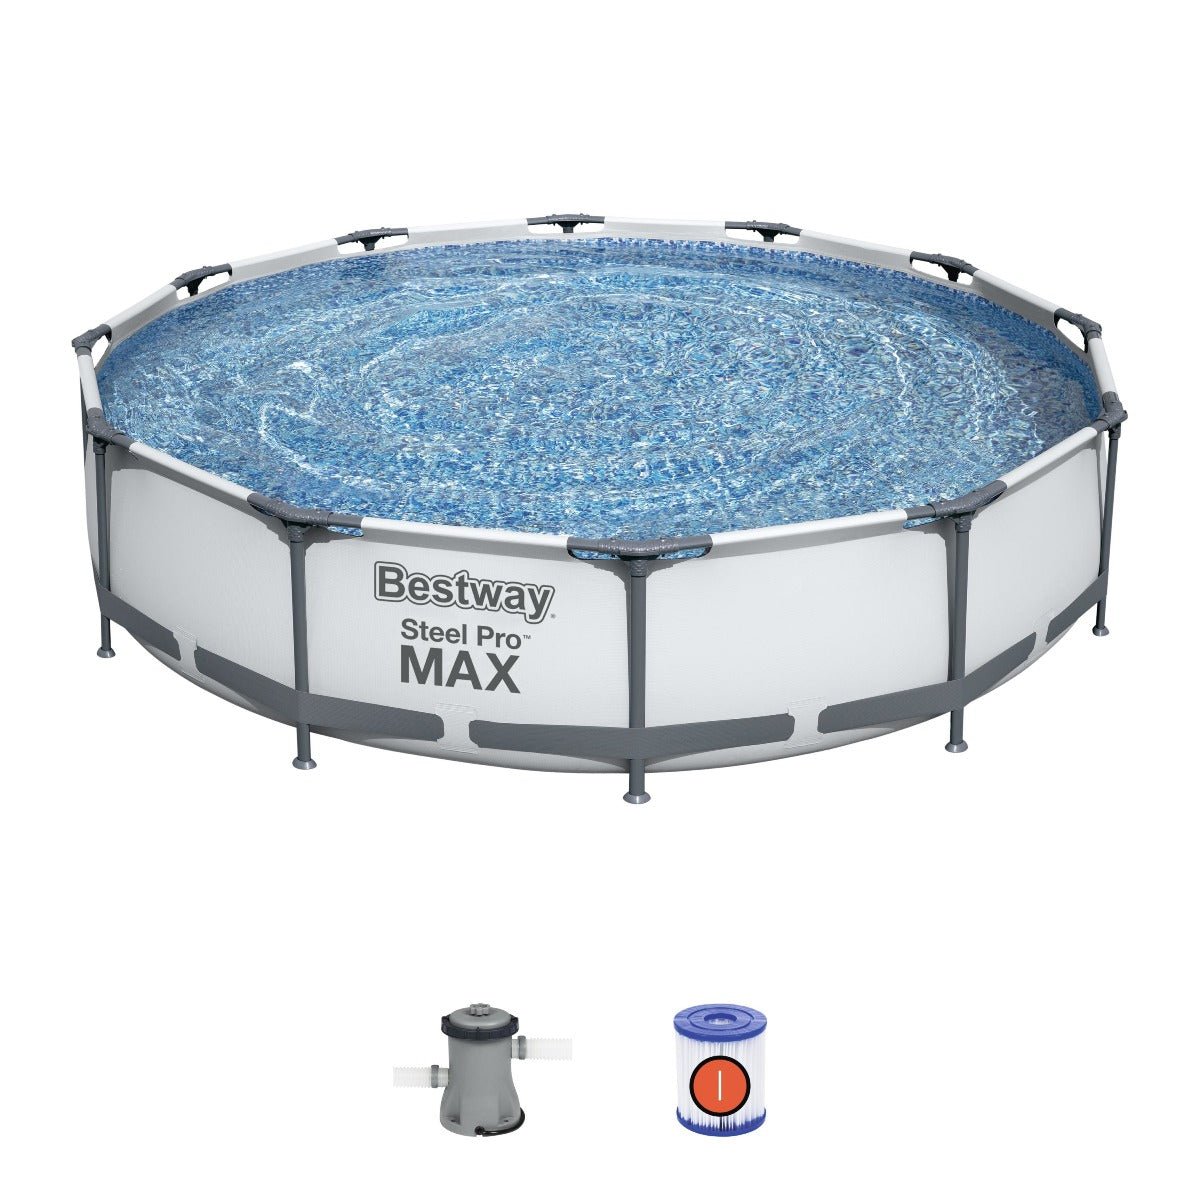 Bestway Steel Pro Frame Swimming Pool with Pump - 12 feet x 30 Inches - New Generation BW56416